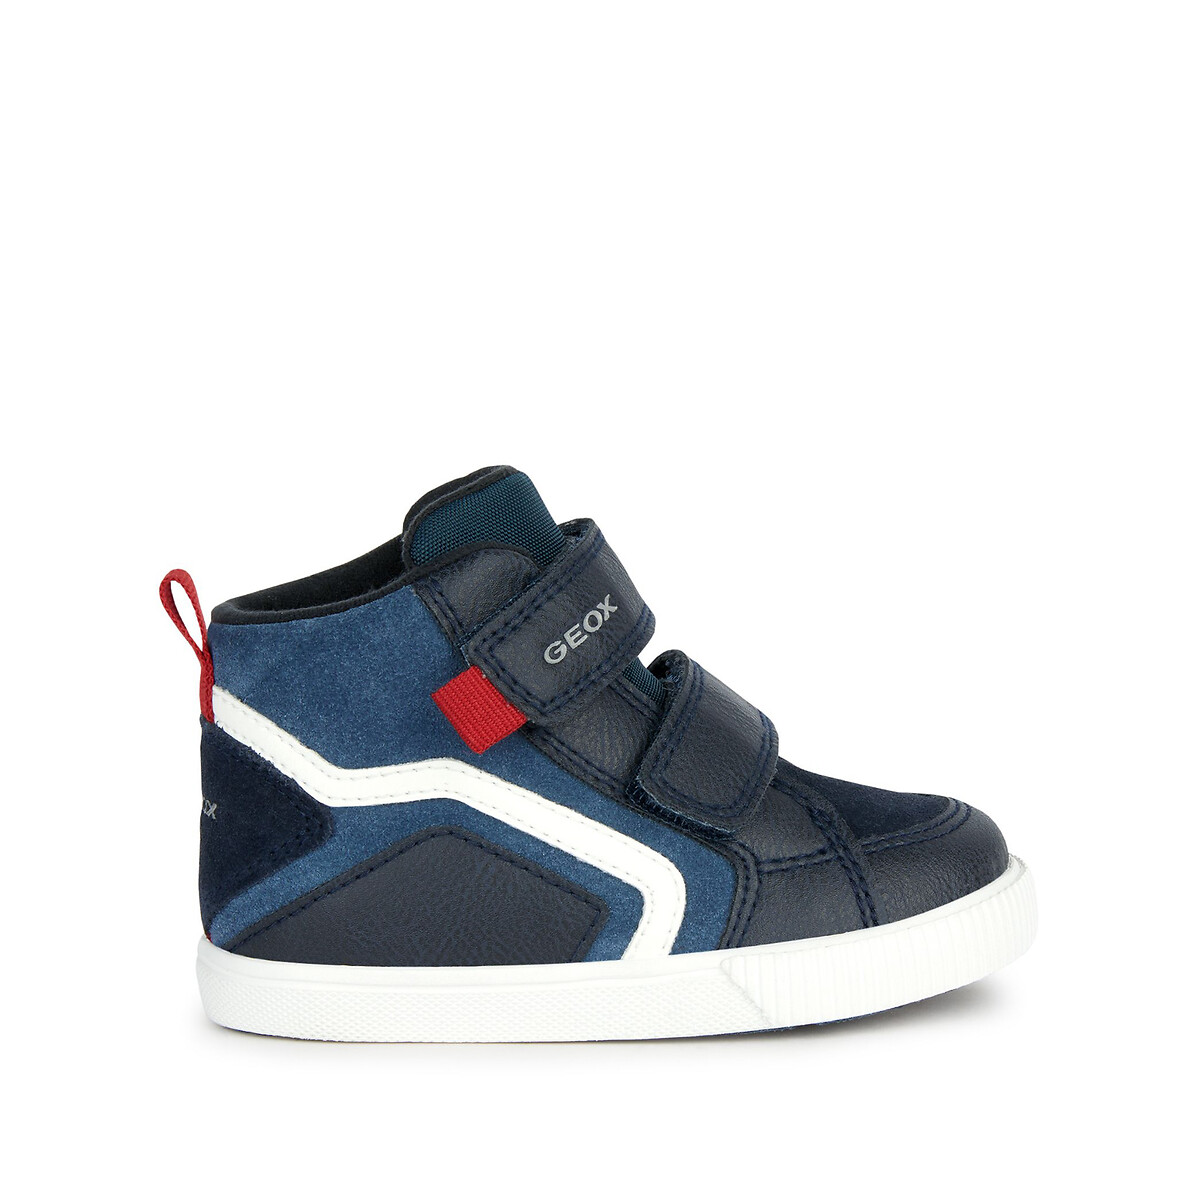 Kids Kilwi Breathable High Top Trainers with Touch ’n’ Close Fastening